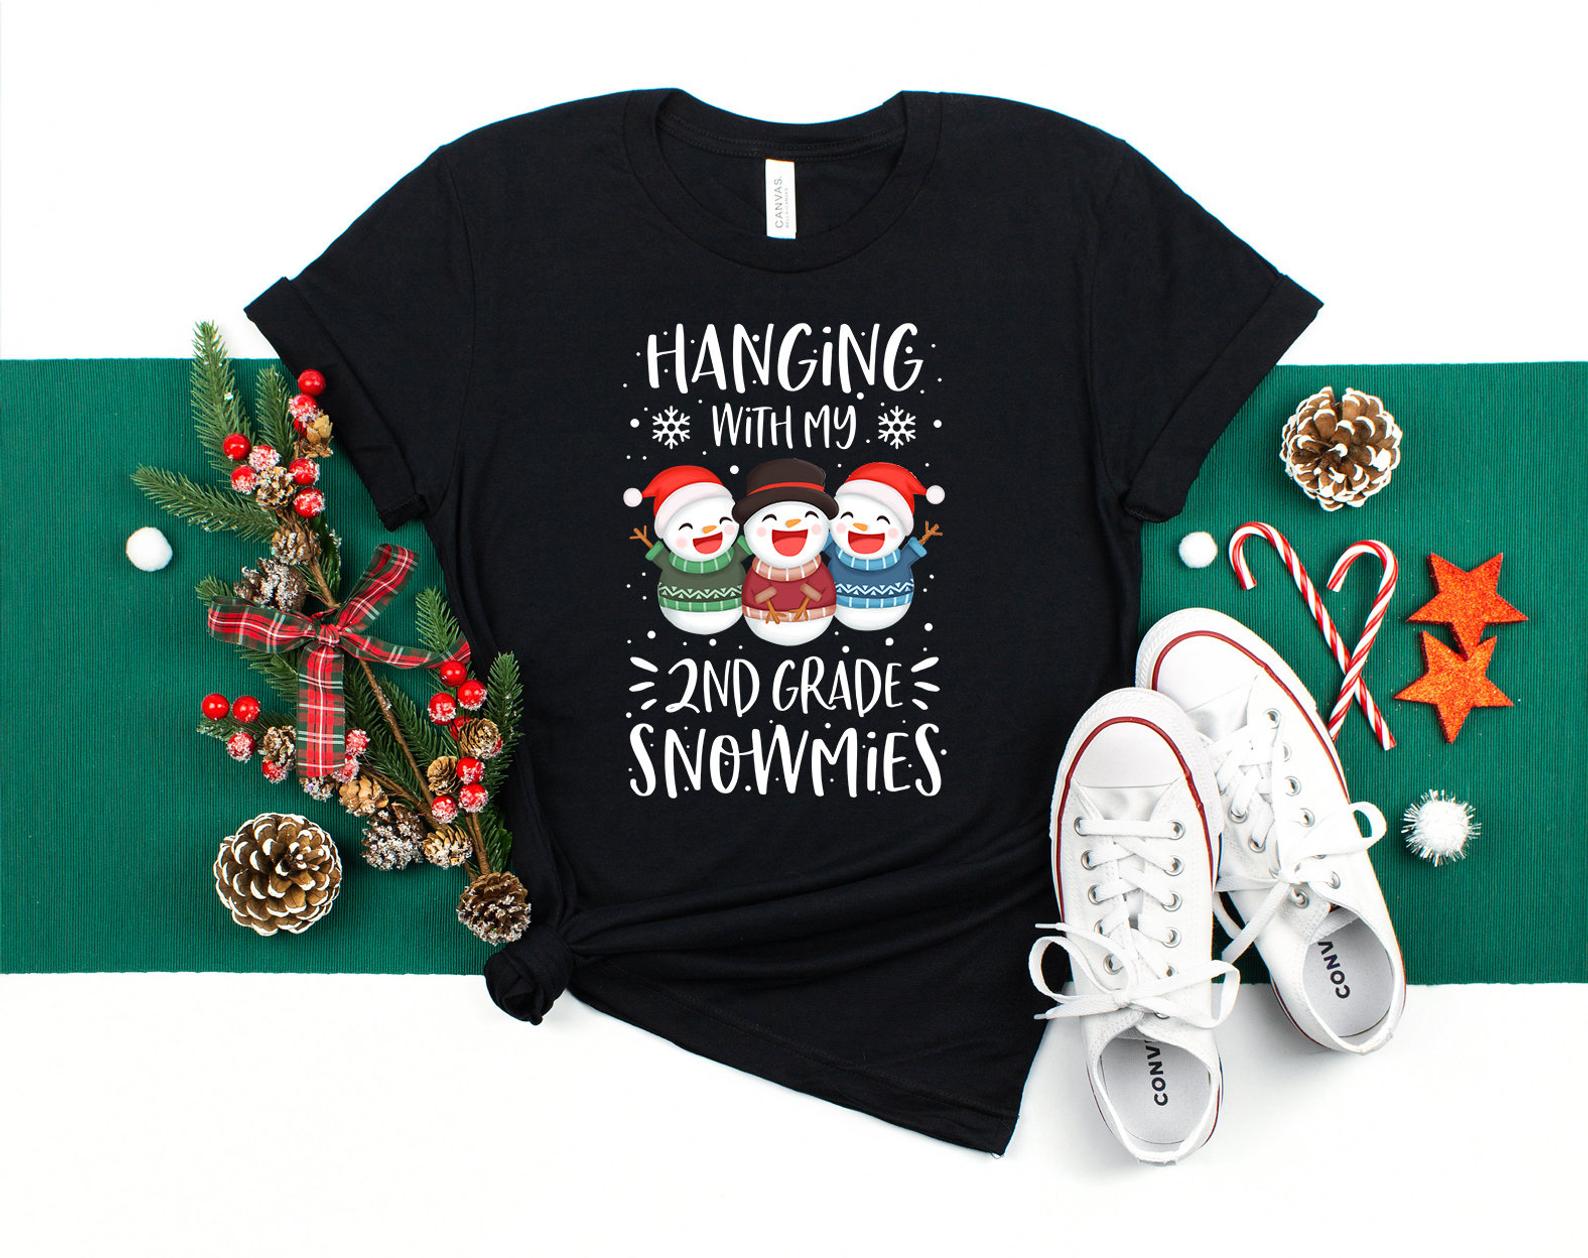 Hanging With My 2nd Grade Snowmies T Shirt Black Unisex S-6XL